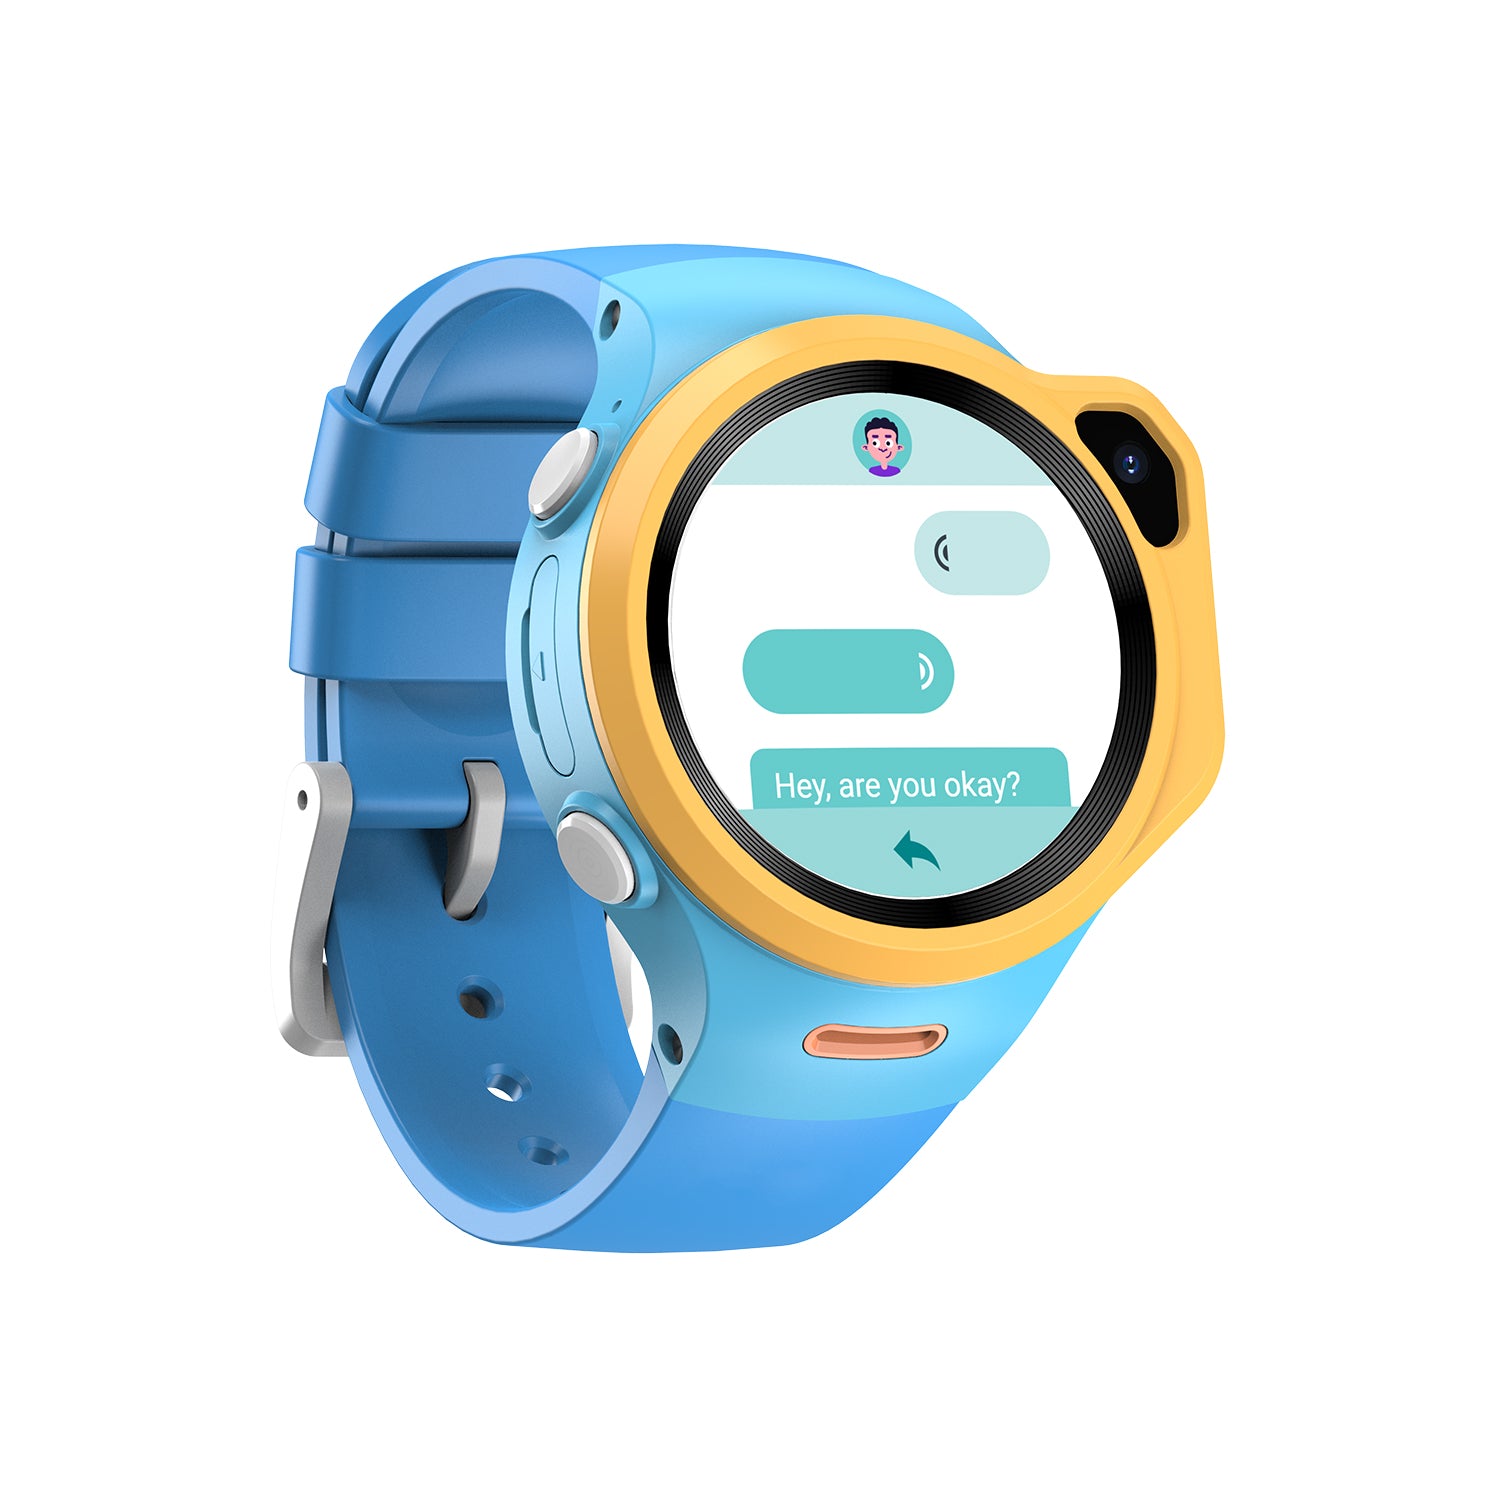 Shop Kids Smart Watch with calling